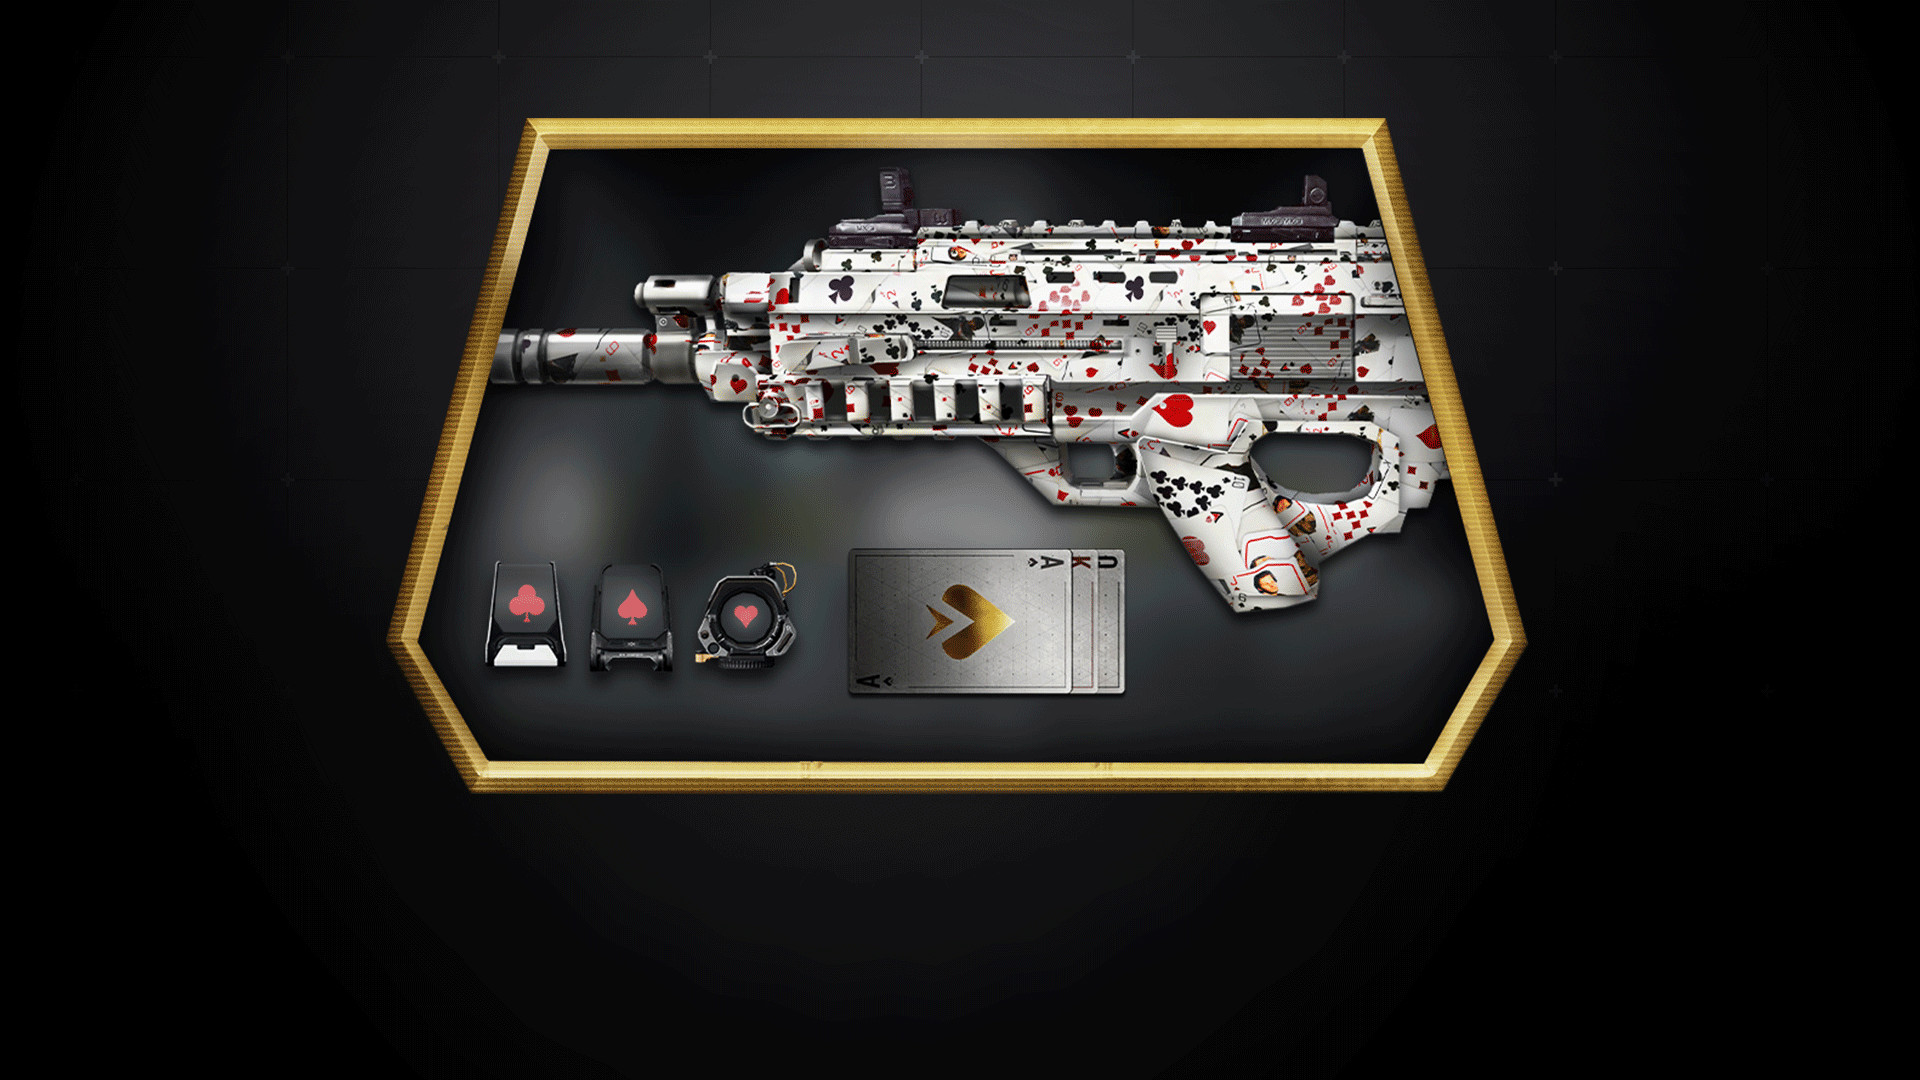 Call of Duty®: Advanced Warfare - Ohm Weapon Pack on Steam